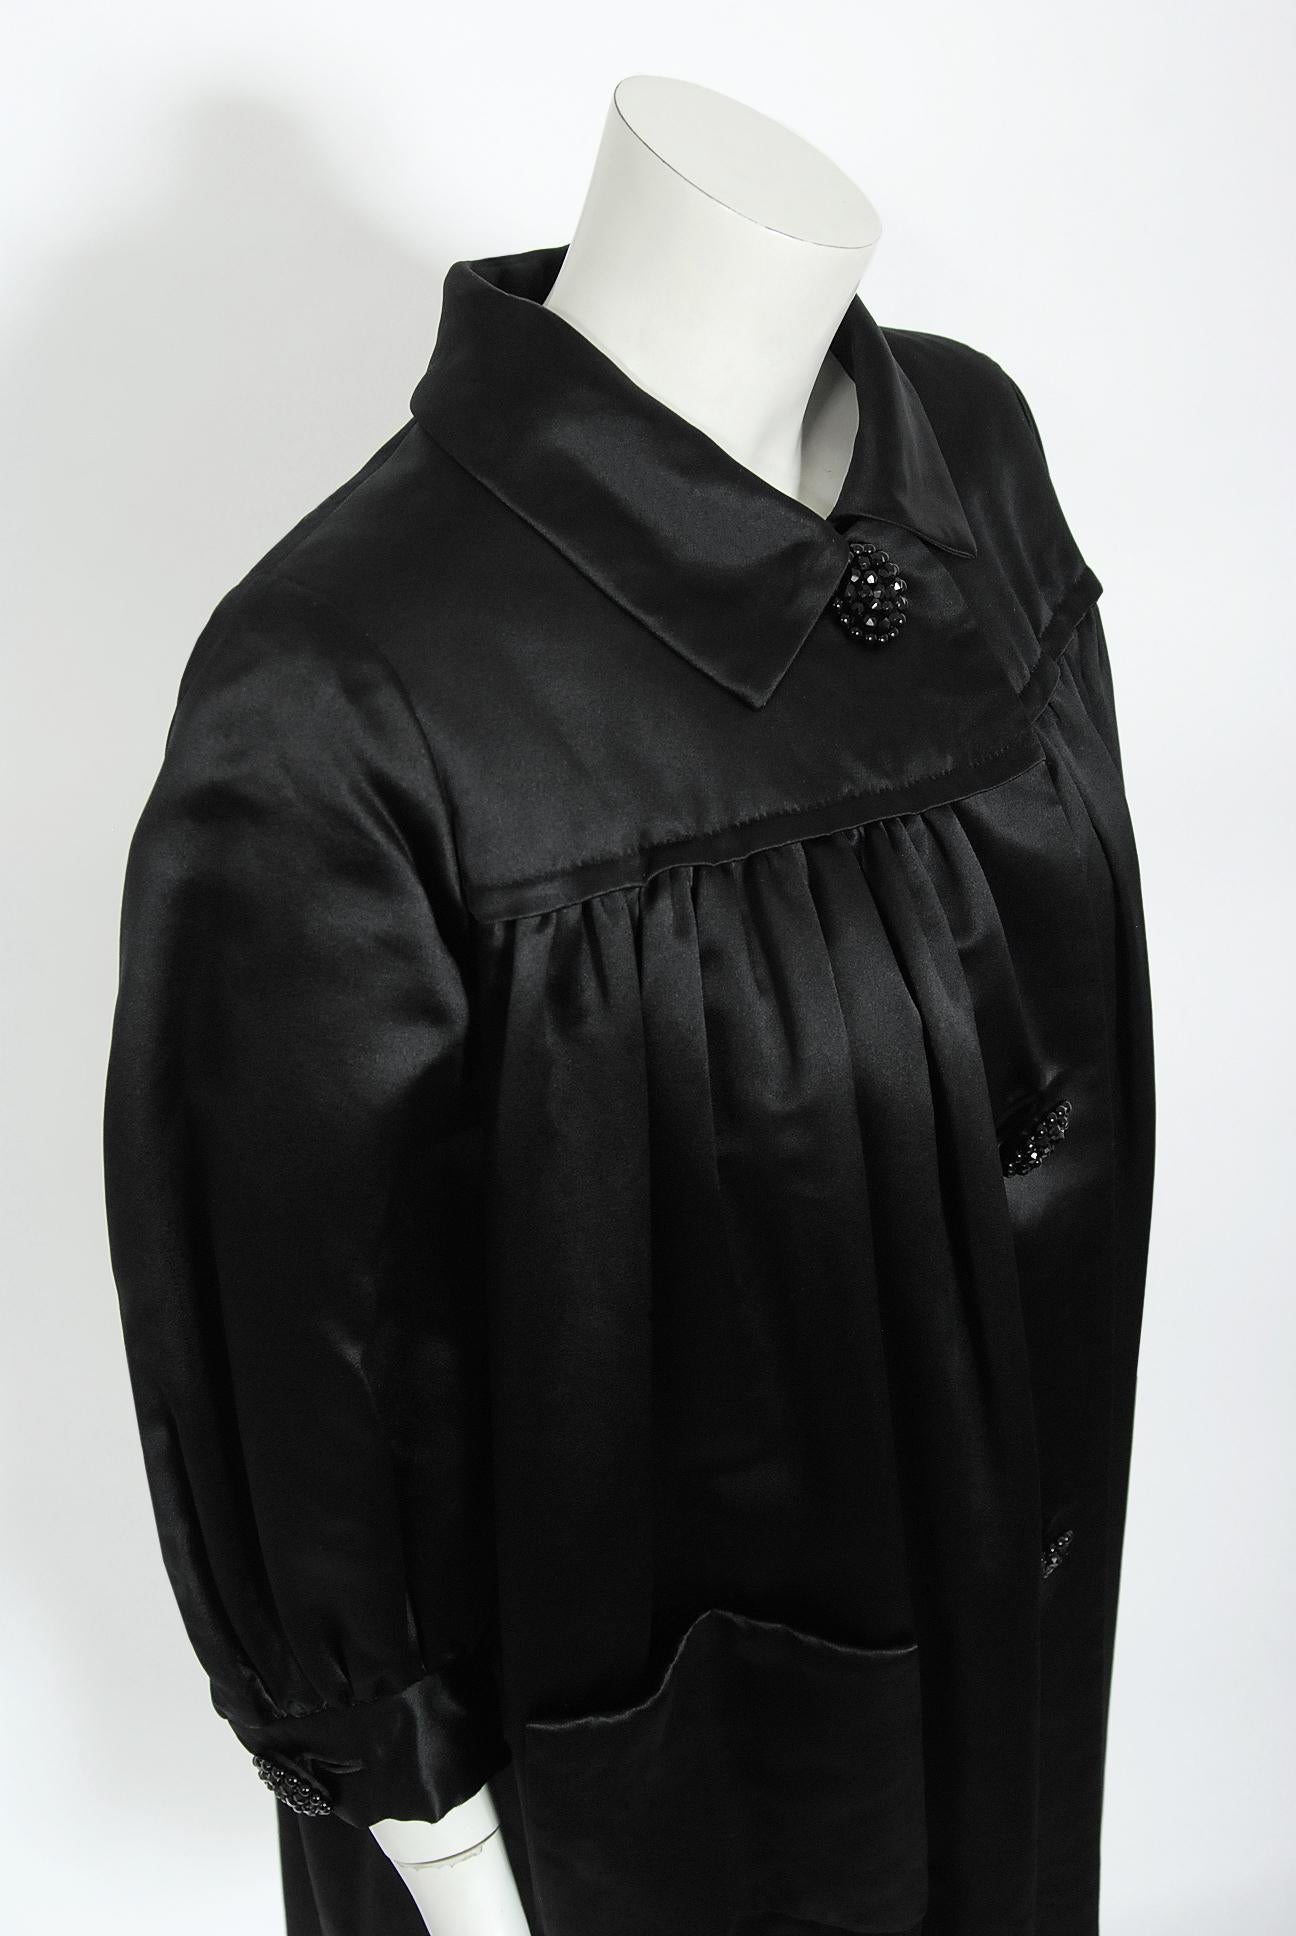 Vintage 1951 Traina-Norell Couture Black Duchess Satin Voluminous Pleated Coat In Good Condition For Sale In Beverly Hills, CA